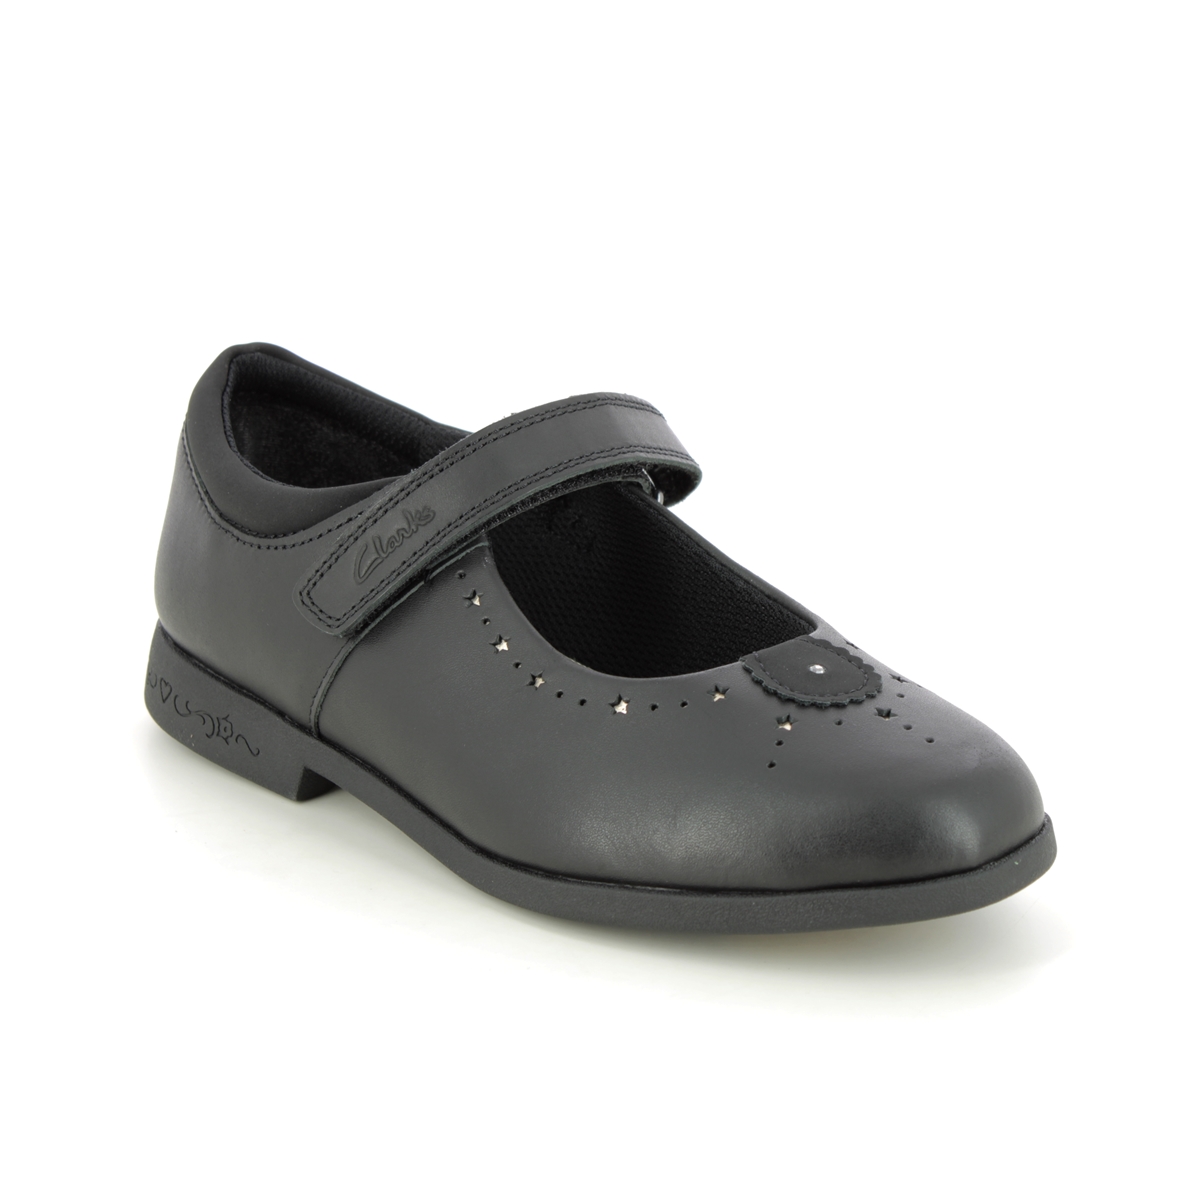 Clarks Magic Step Mj O Black Leather Kids Girls School Shoes 697056F In Size 2.5 In Plain Black Leather F Width Fitting Regular Fit For School For kid